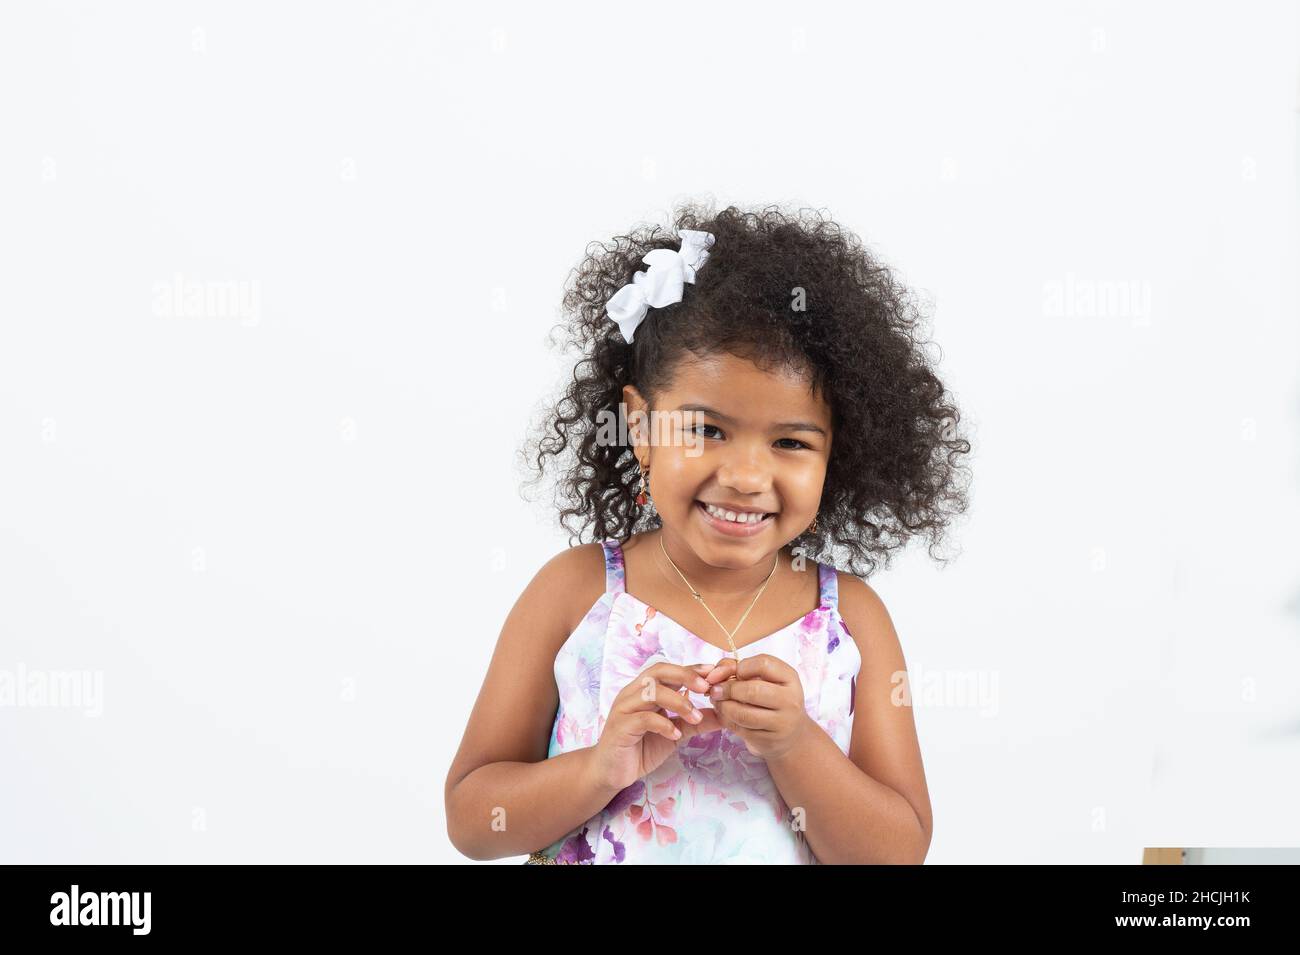 Closeup portrait of 4 or 5 year old girl, smiling, white background Stock Photo